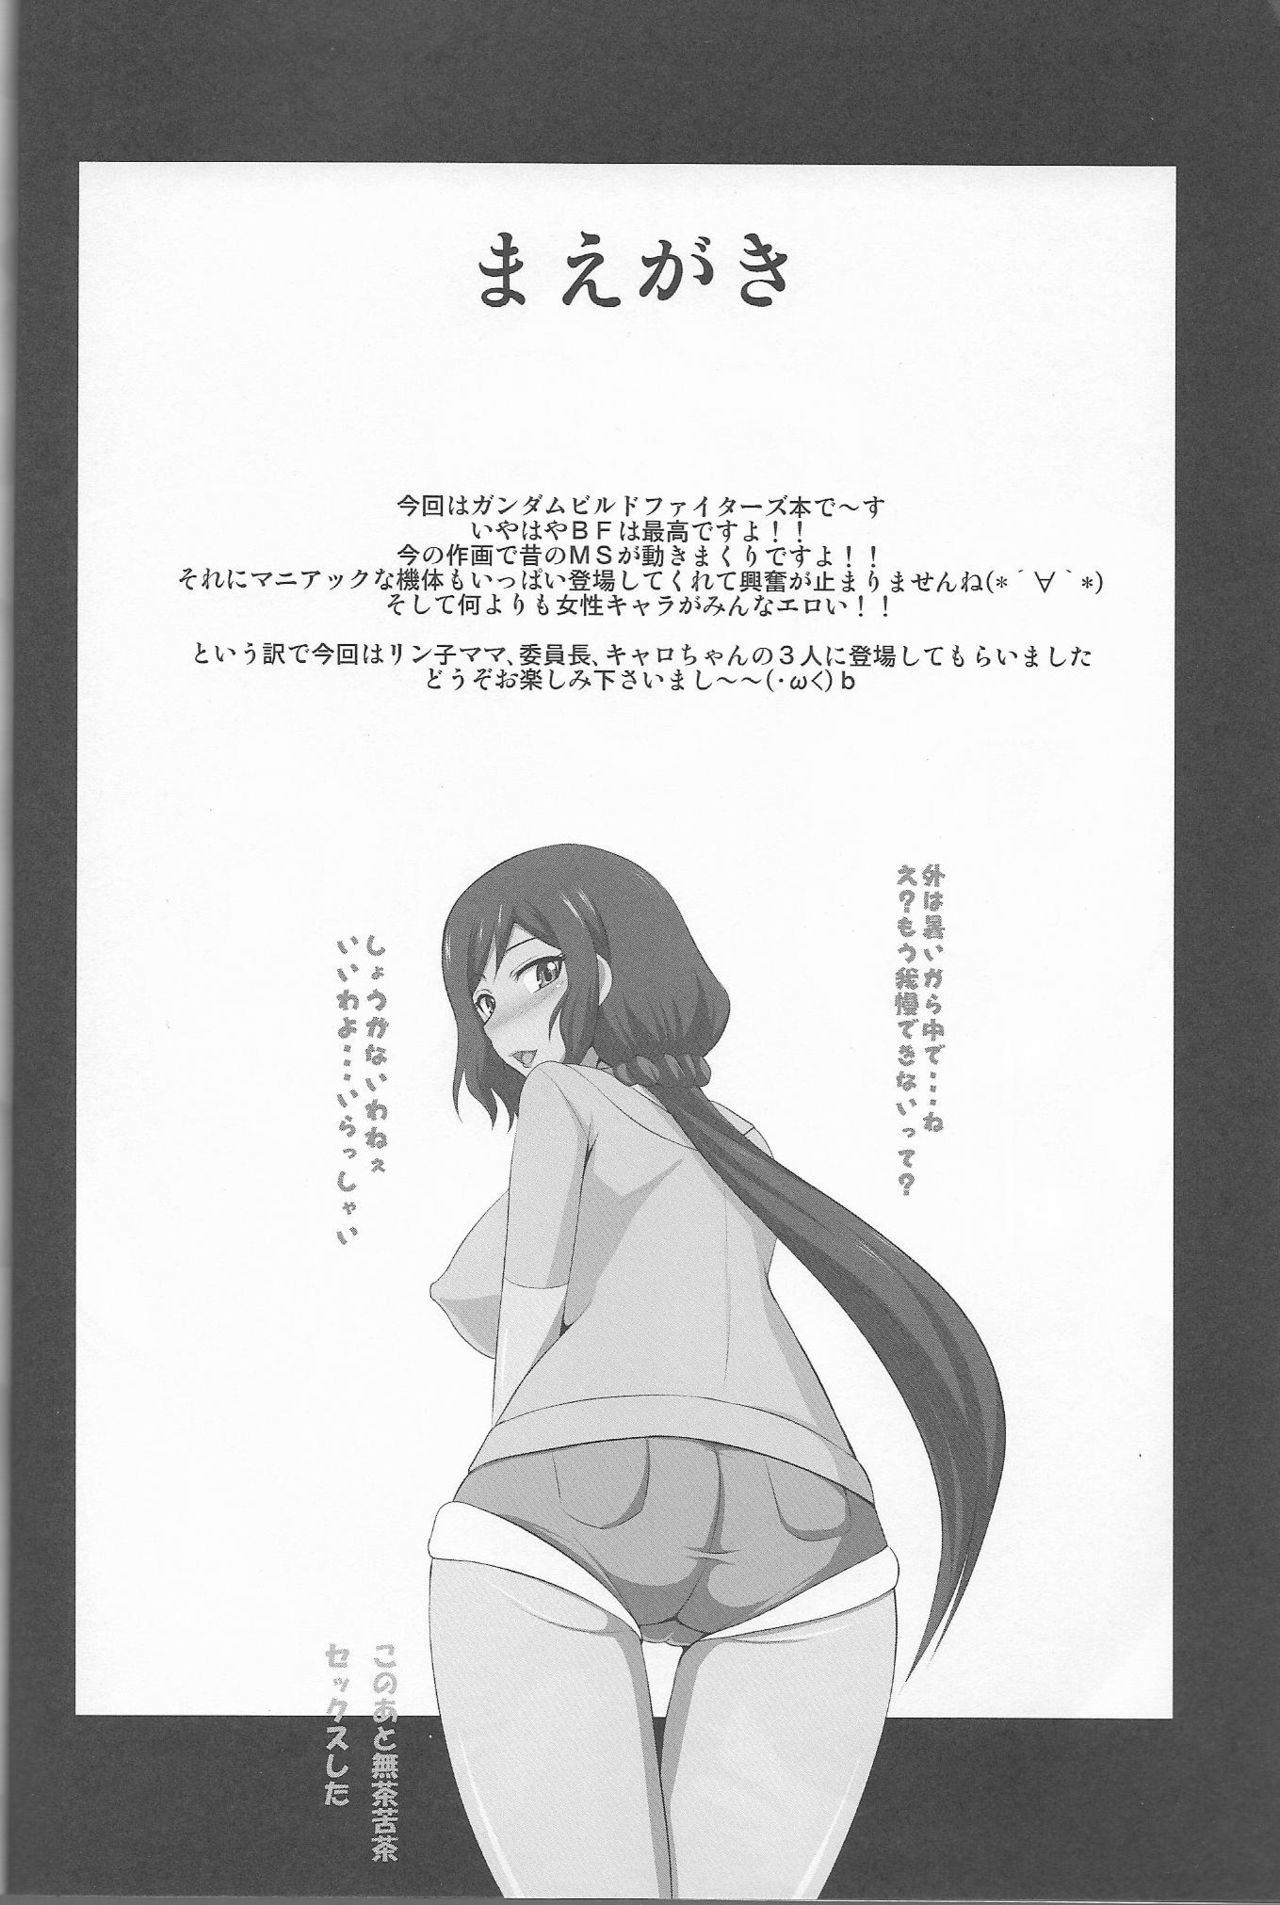 (CT23) [Take Out (Zeros)] SEX FIGHTERS (Gundam Build Fighters) page 3 full